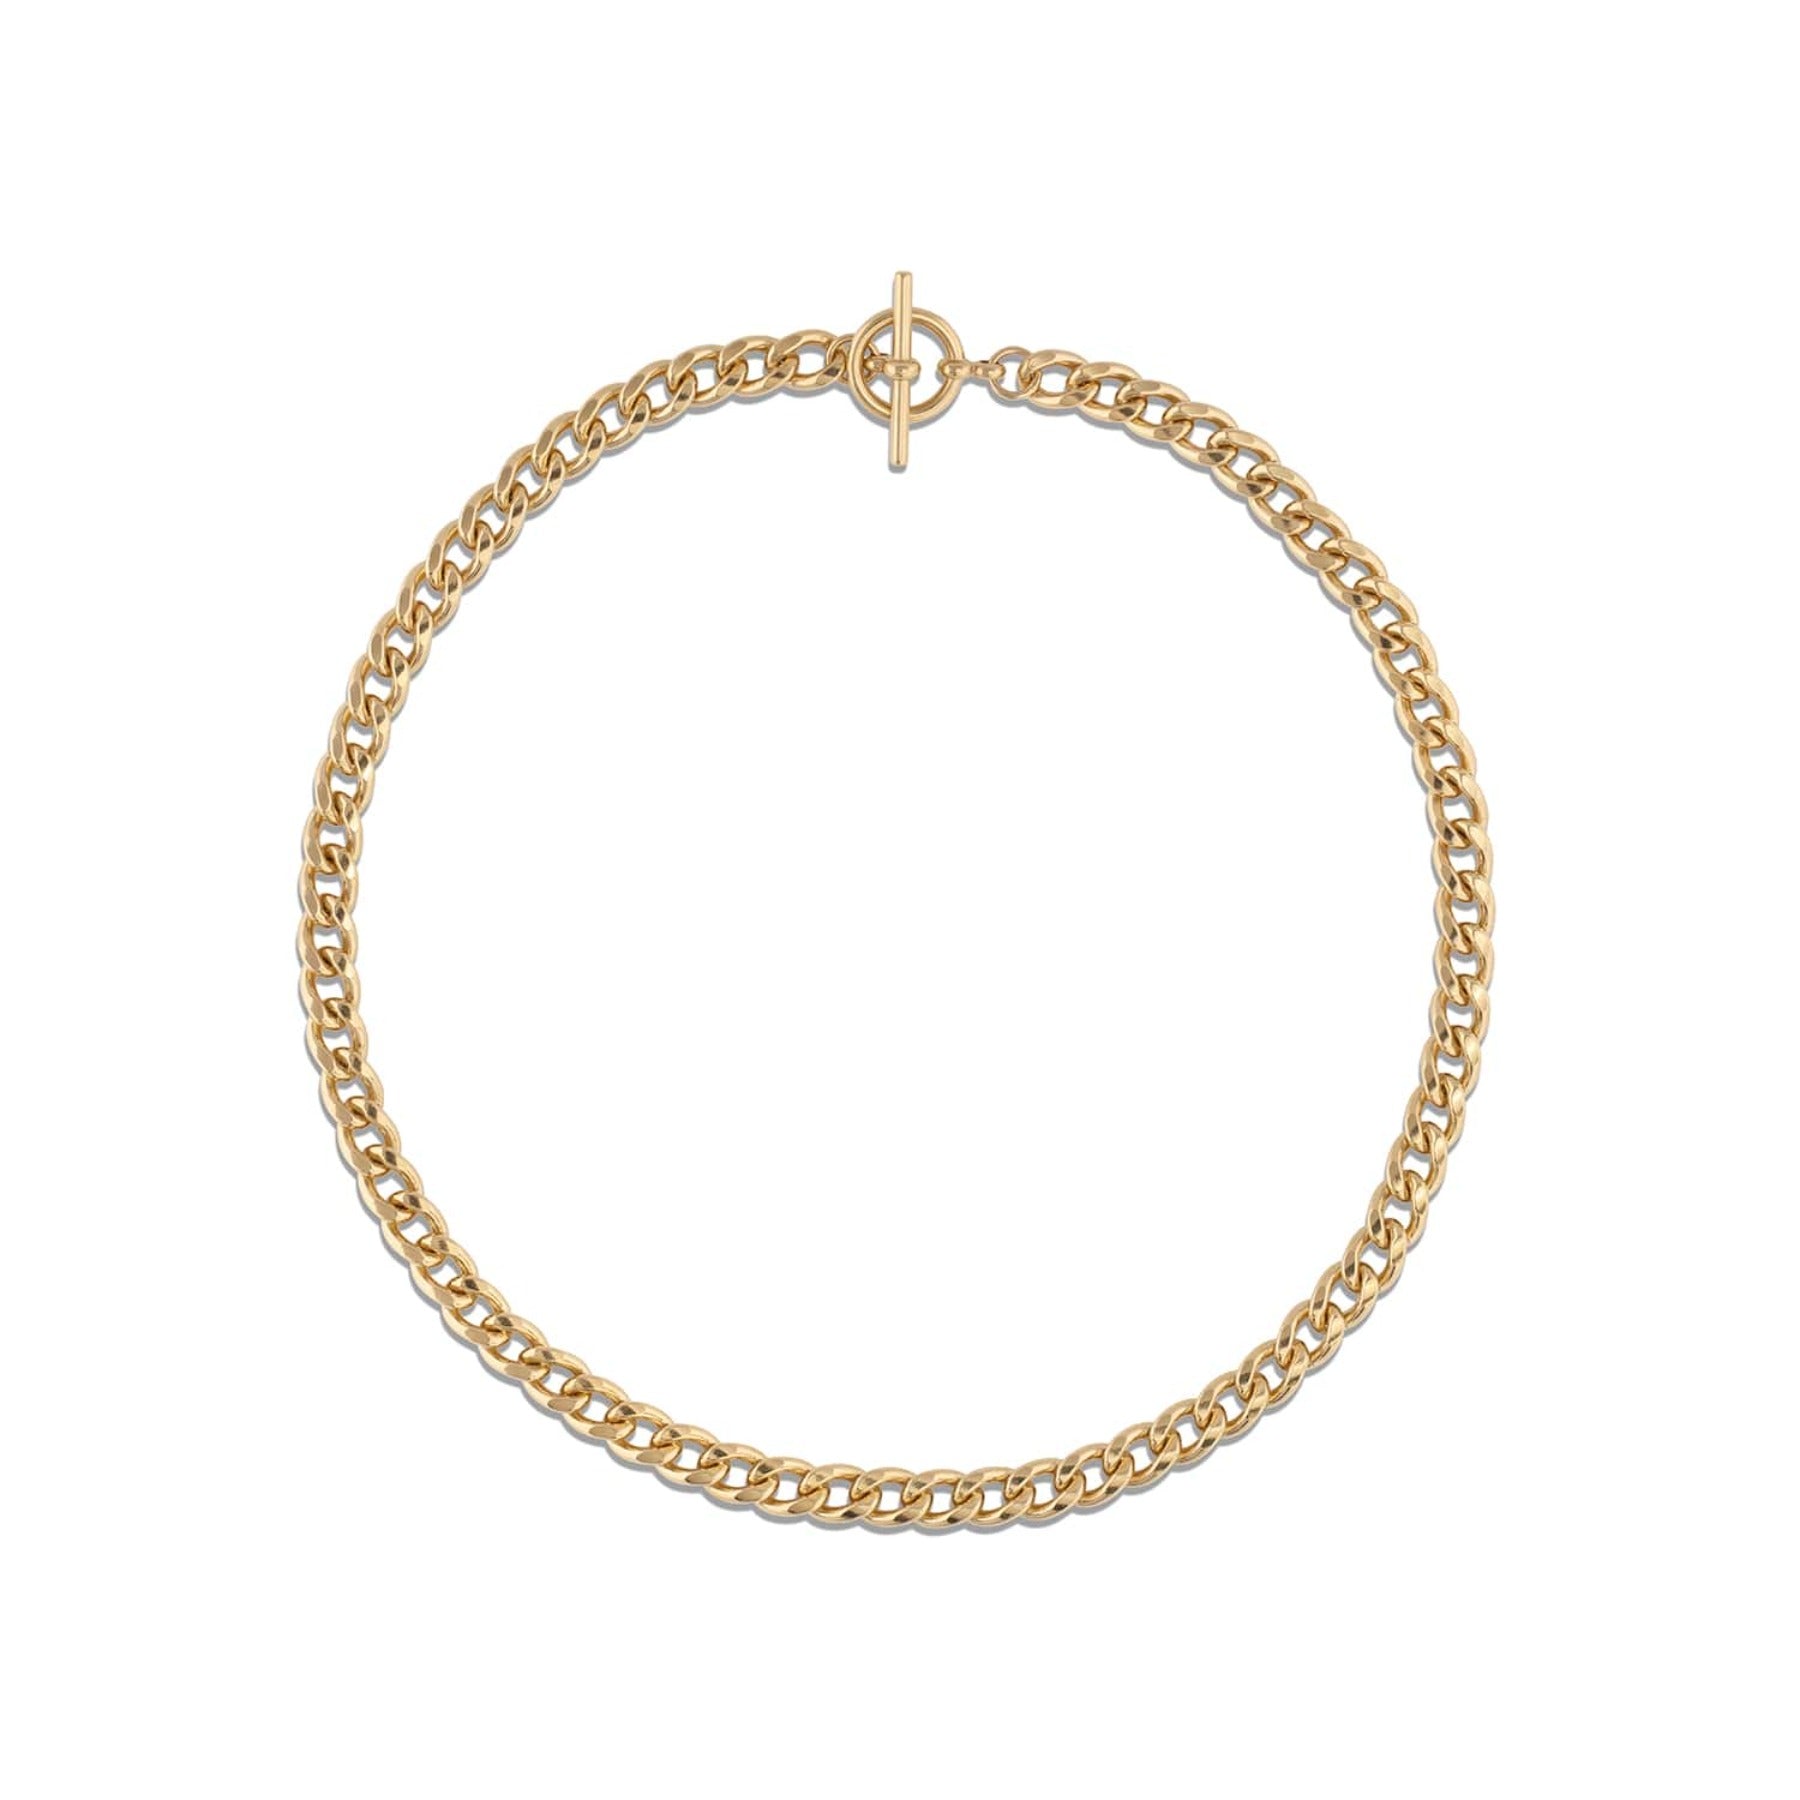 Flat curb chain necklace with toggle clasp in 18k gold vermeil.